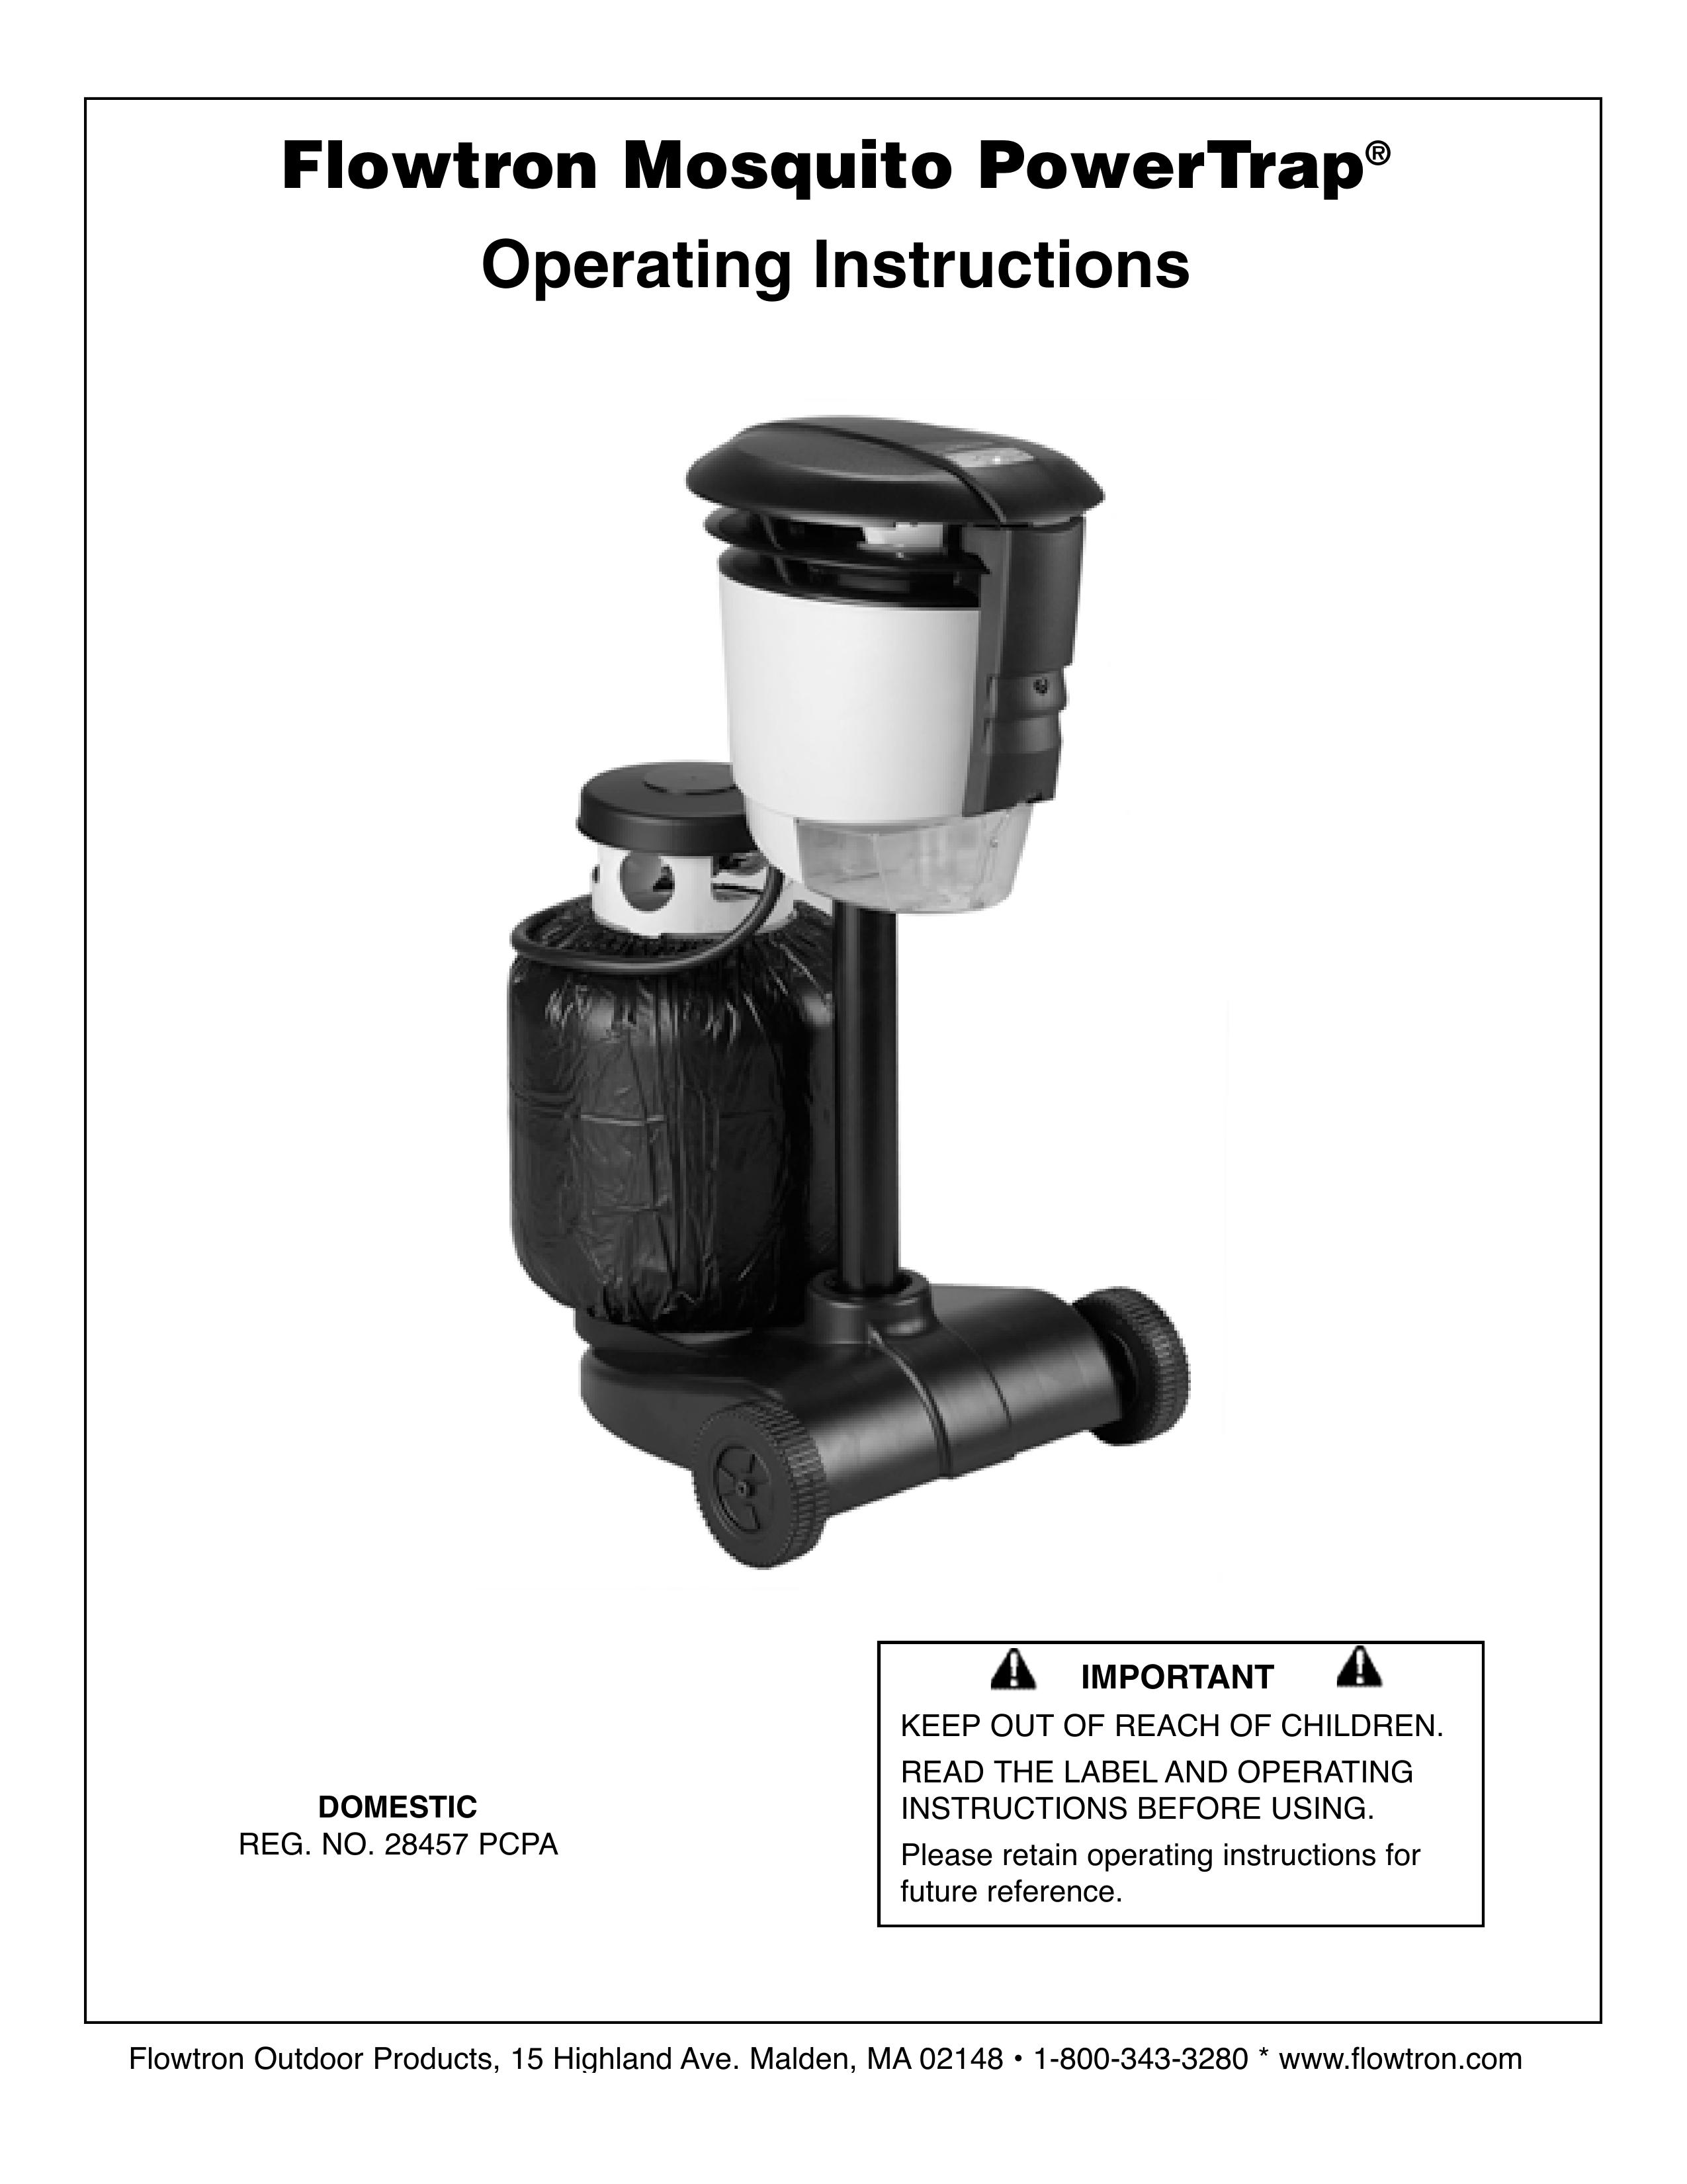 Flowtron Outdoor Products MT-300 Series Insect Control Equipment User Manual